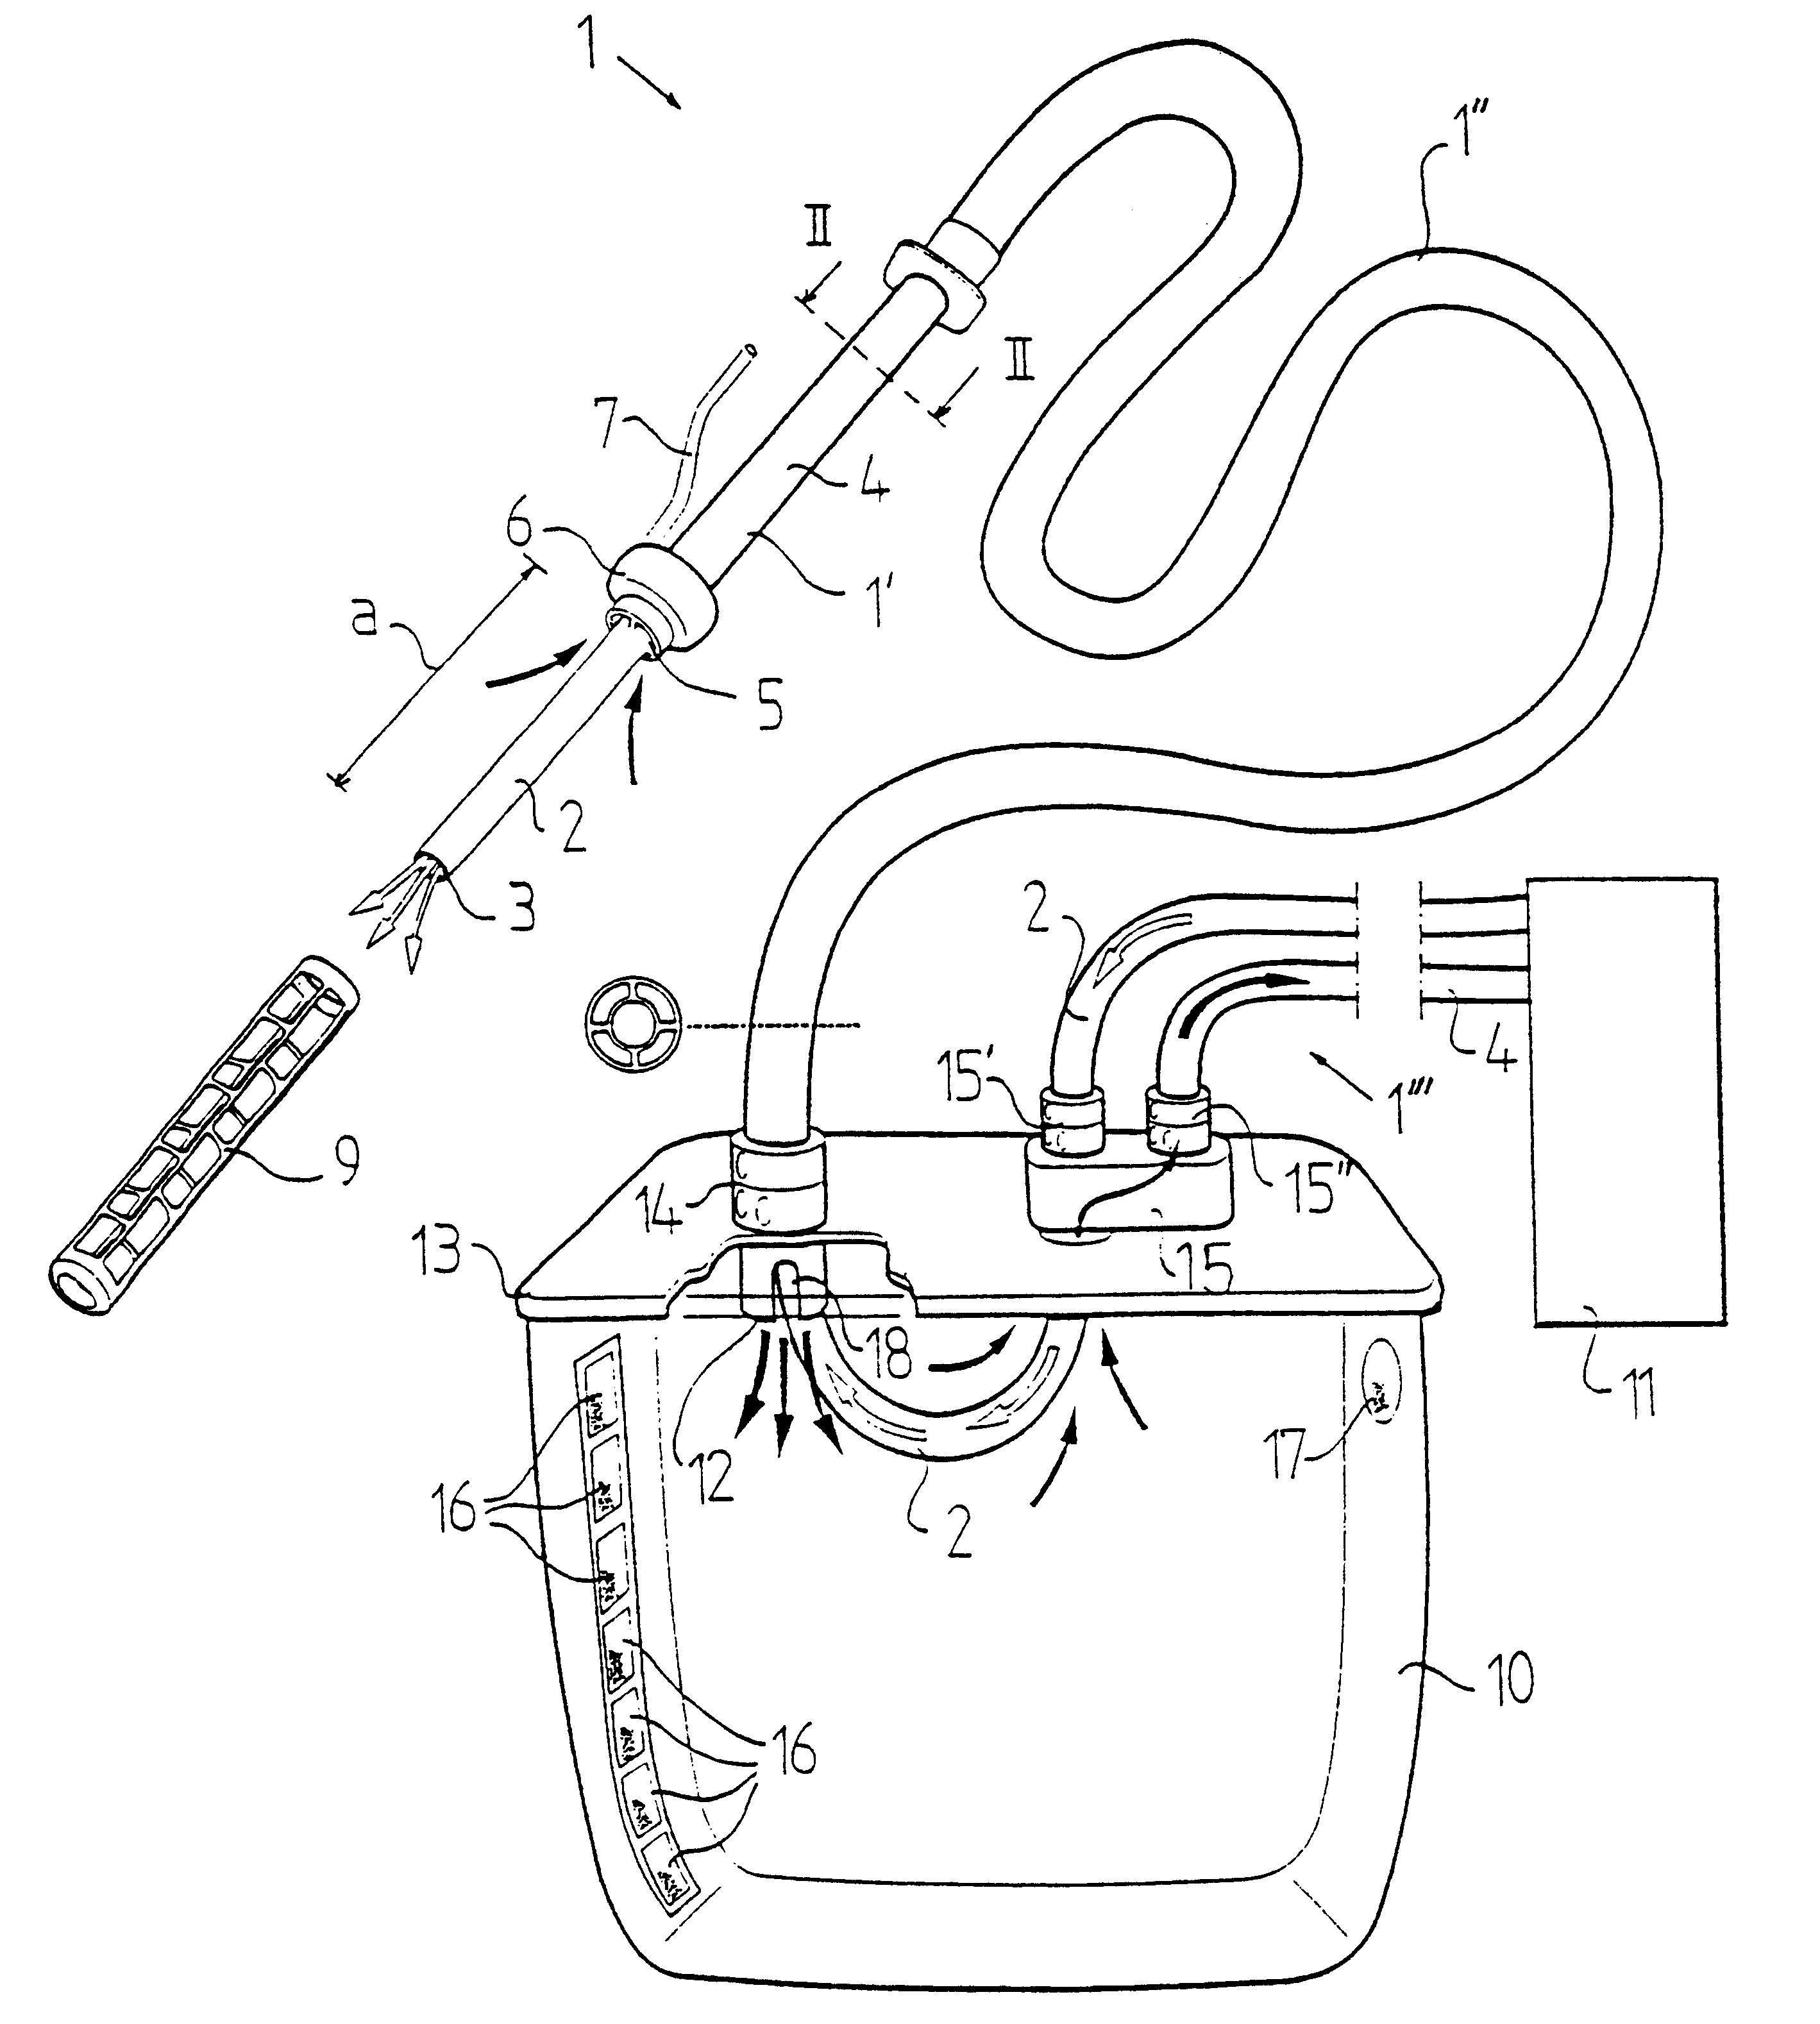 Device for supplying inhalation gas to and removing exhalation gas from a patient